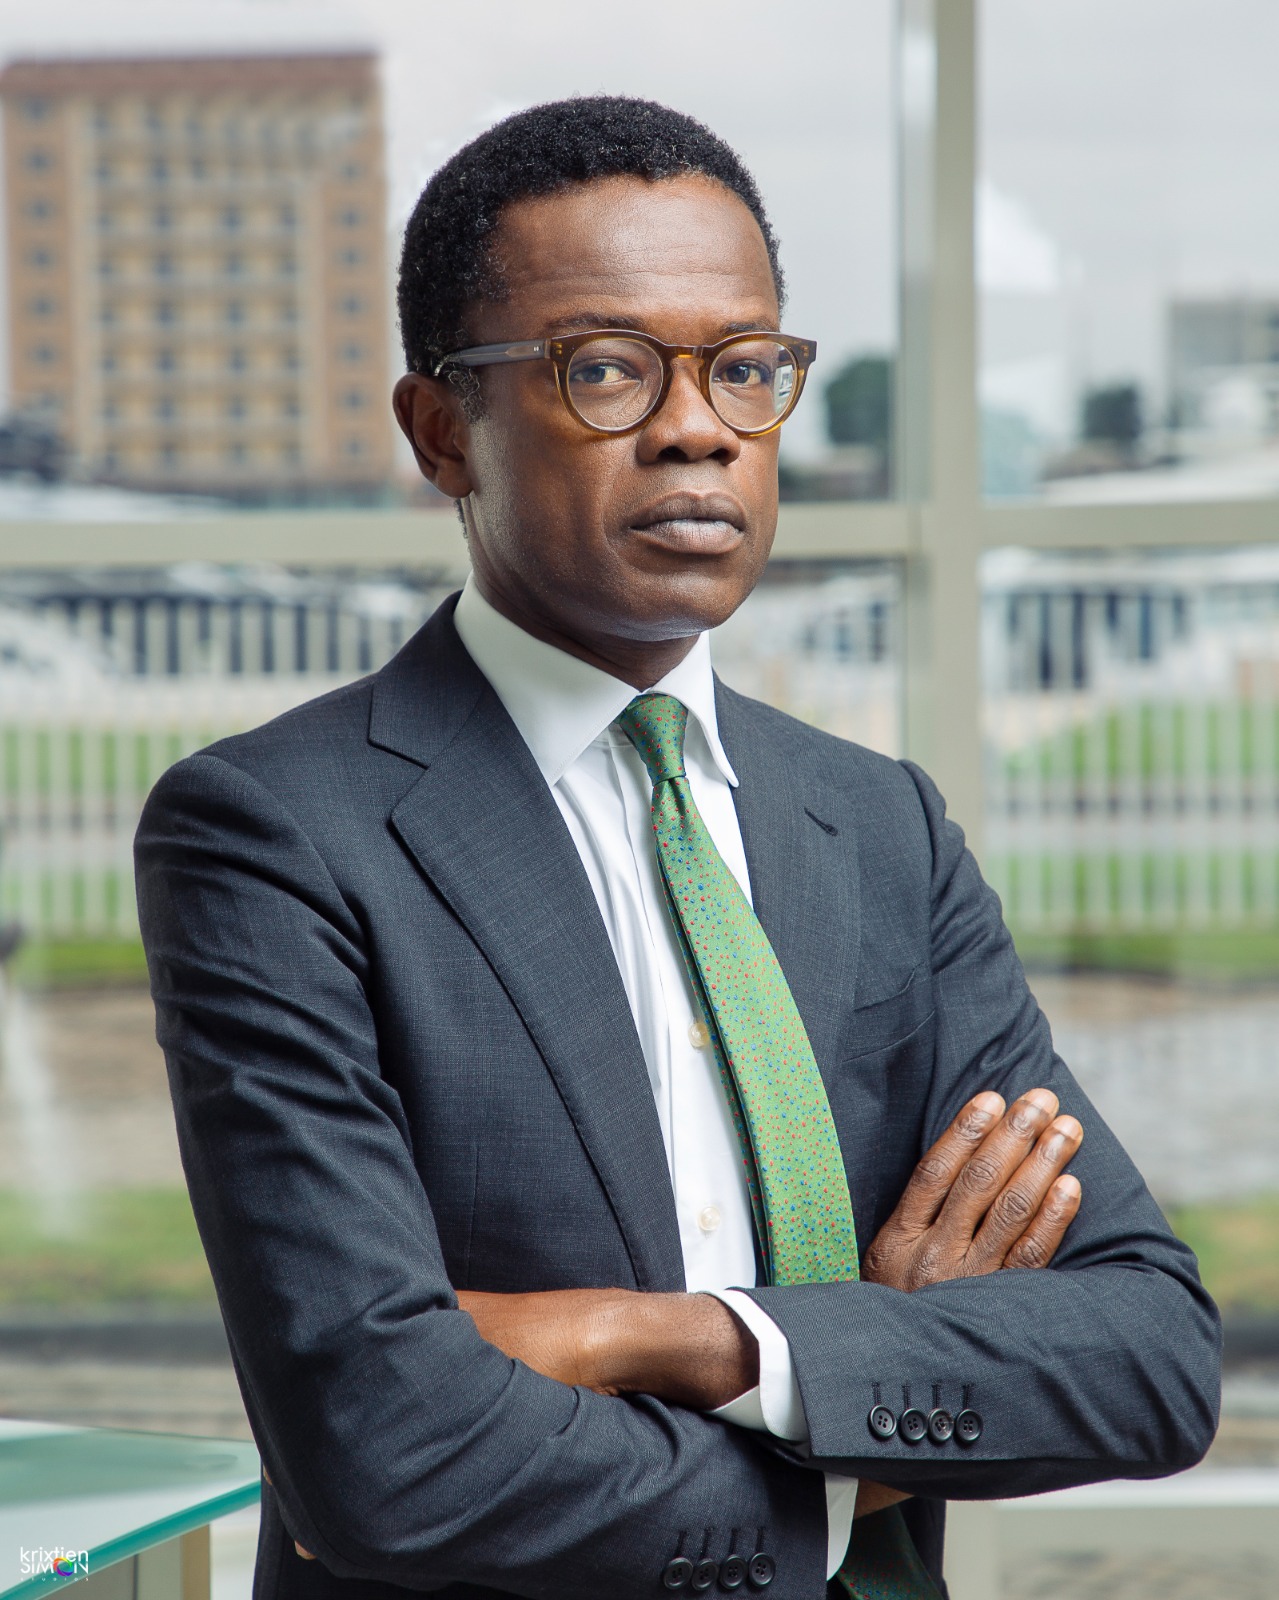 Olu Adeosun Resigns As CEO Of Ardova Plc. Moshood Olajide Now Appointed Managing Director